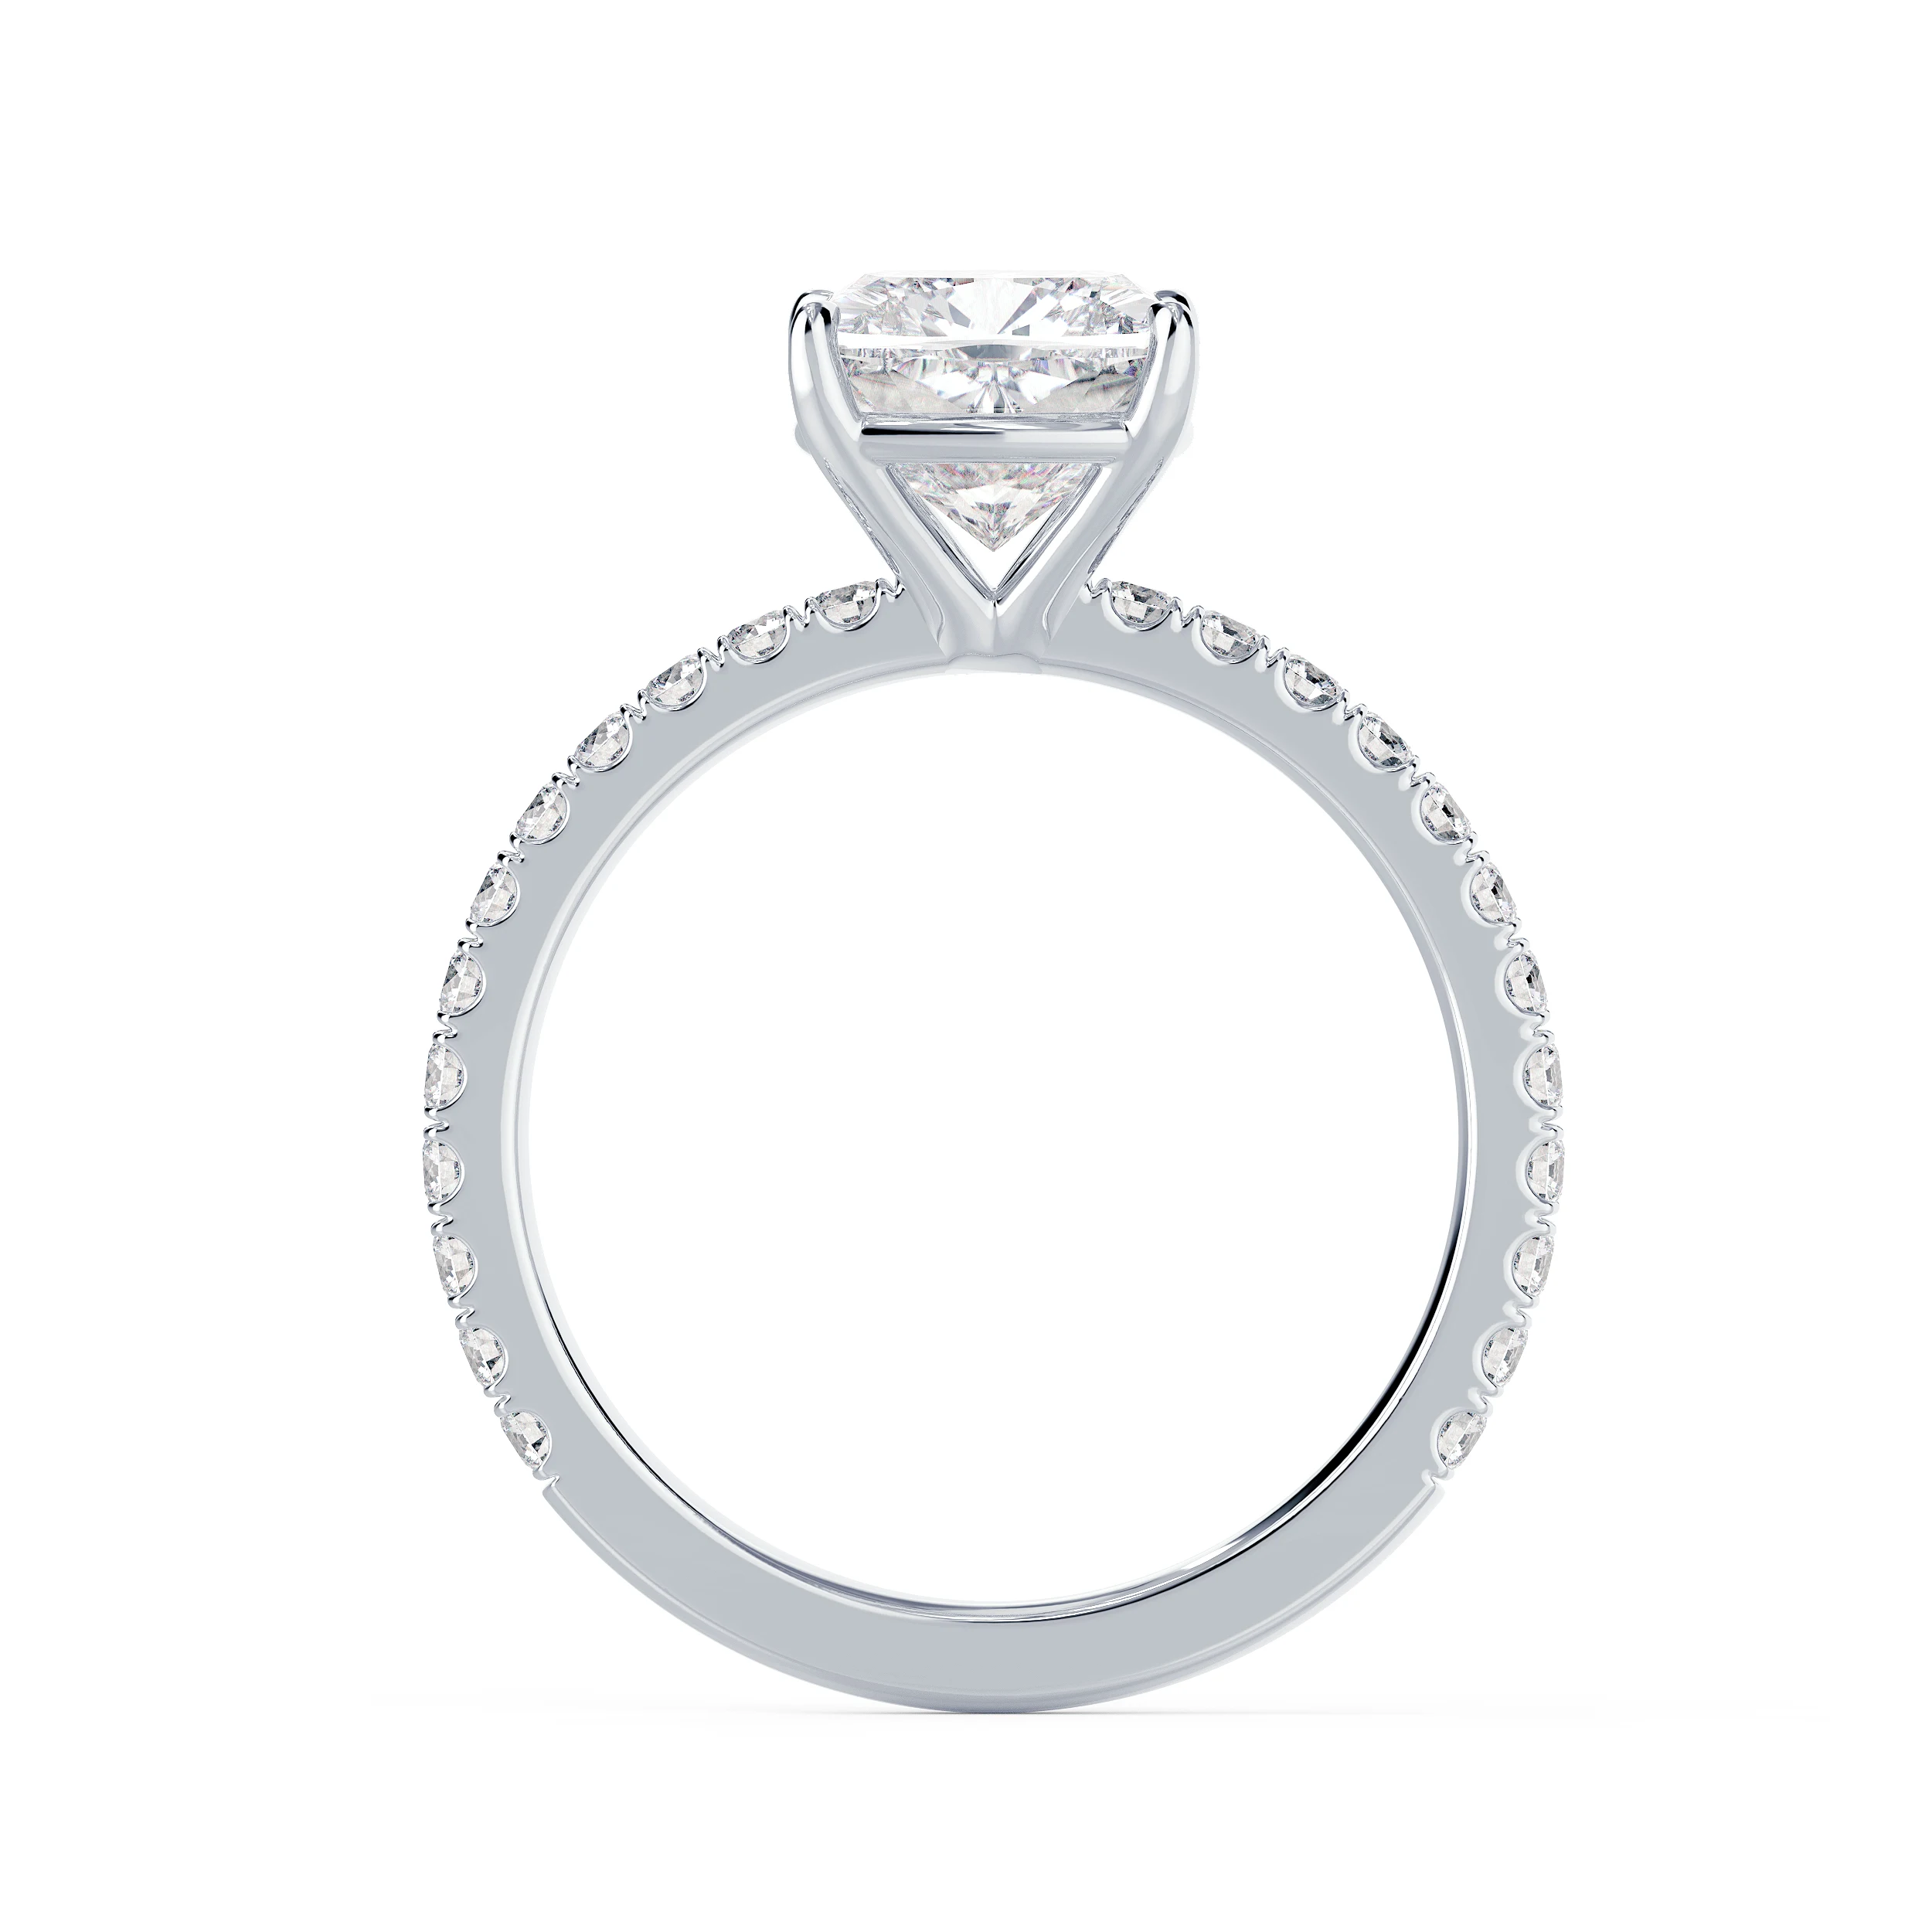 High Quality Lab Diamonds set in White Gold Cushion Petite Four Prong Pavé Setting (Profile View)